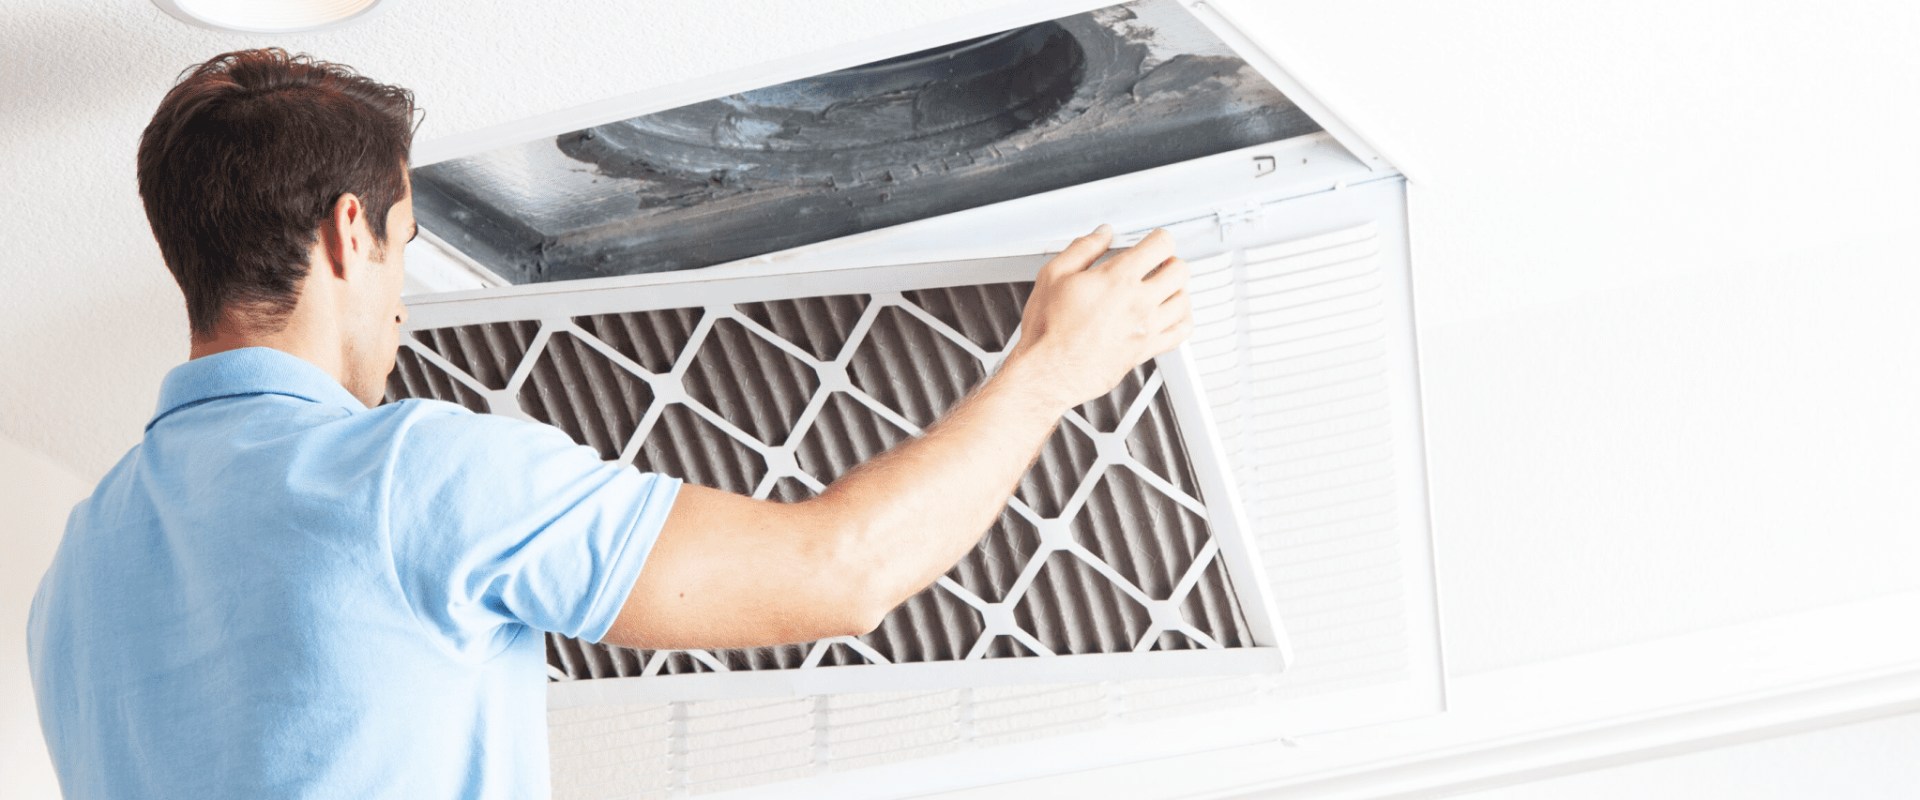 How long can hvac run without filter?